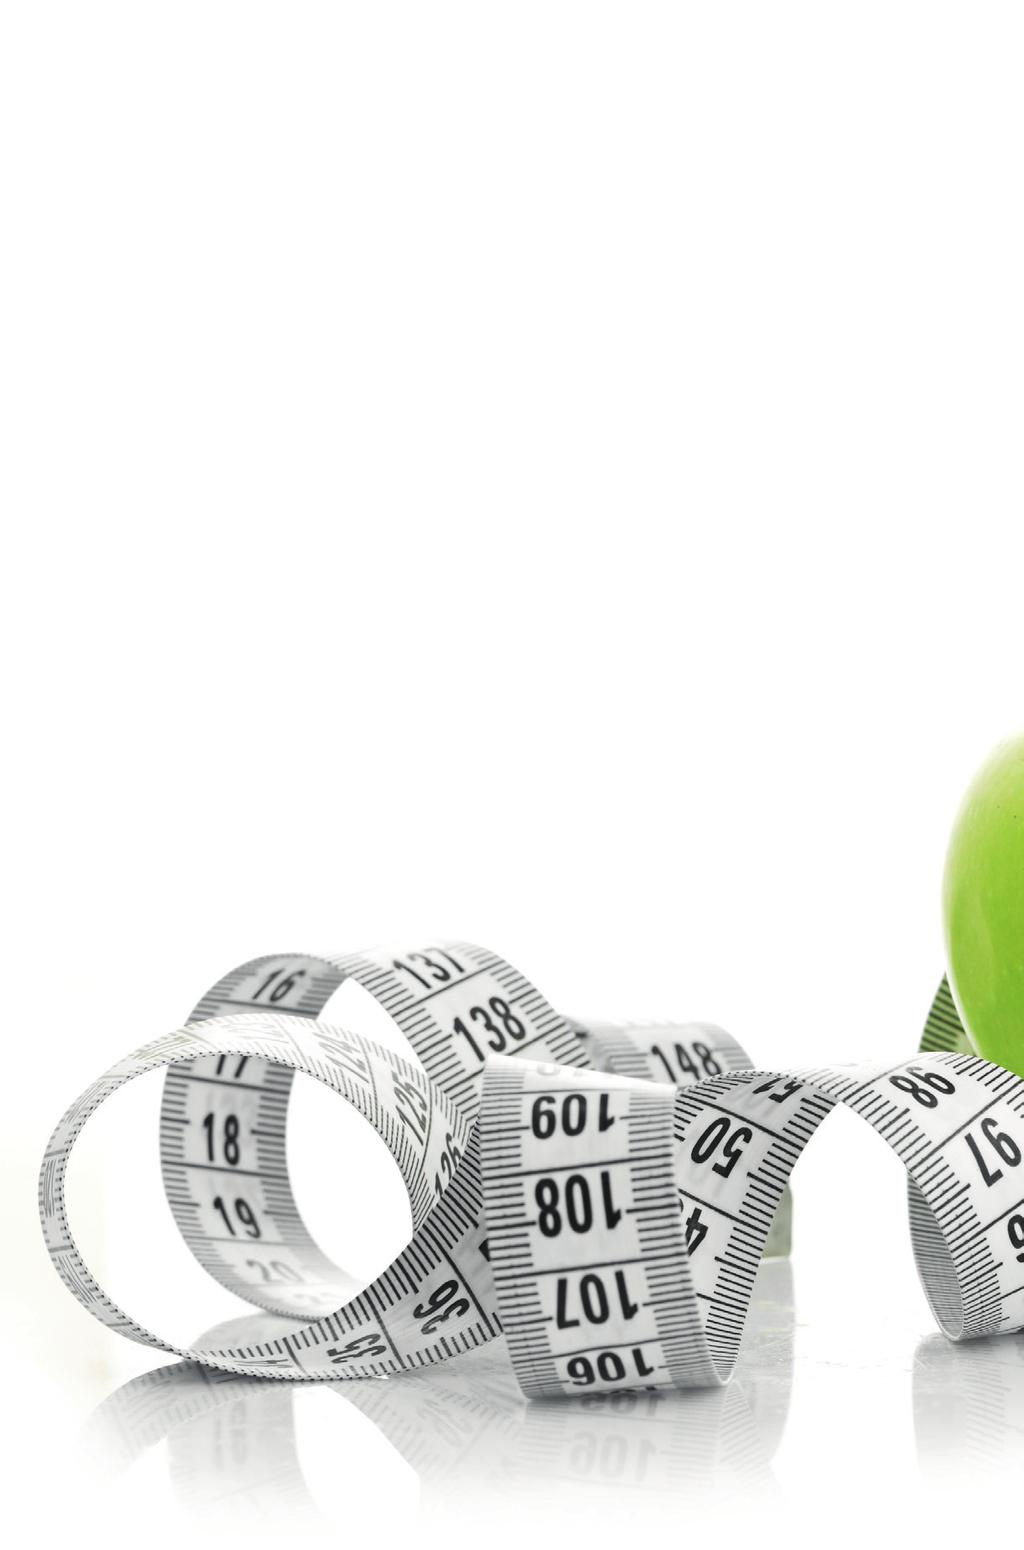 WORKING WITH WEIGHT LOSS PROFESSIONALS The importance of weight management has become increasingly topical over recent years.